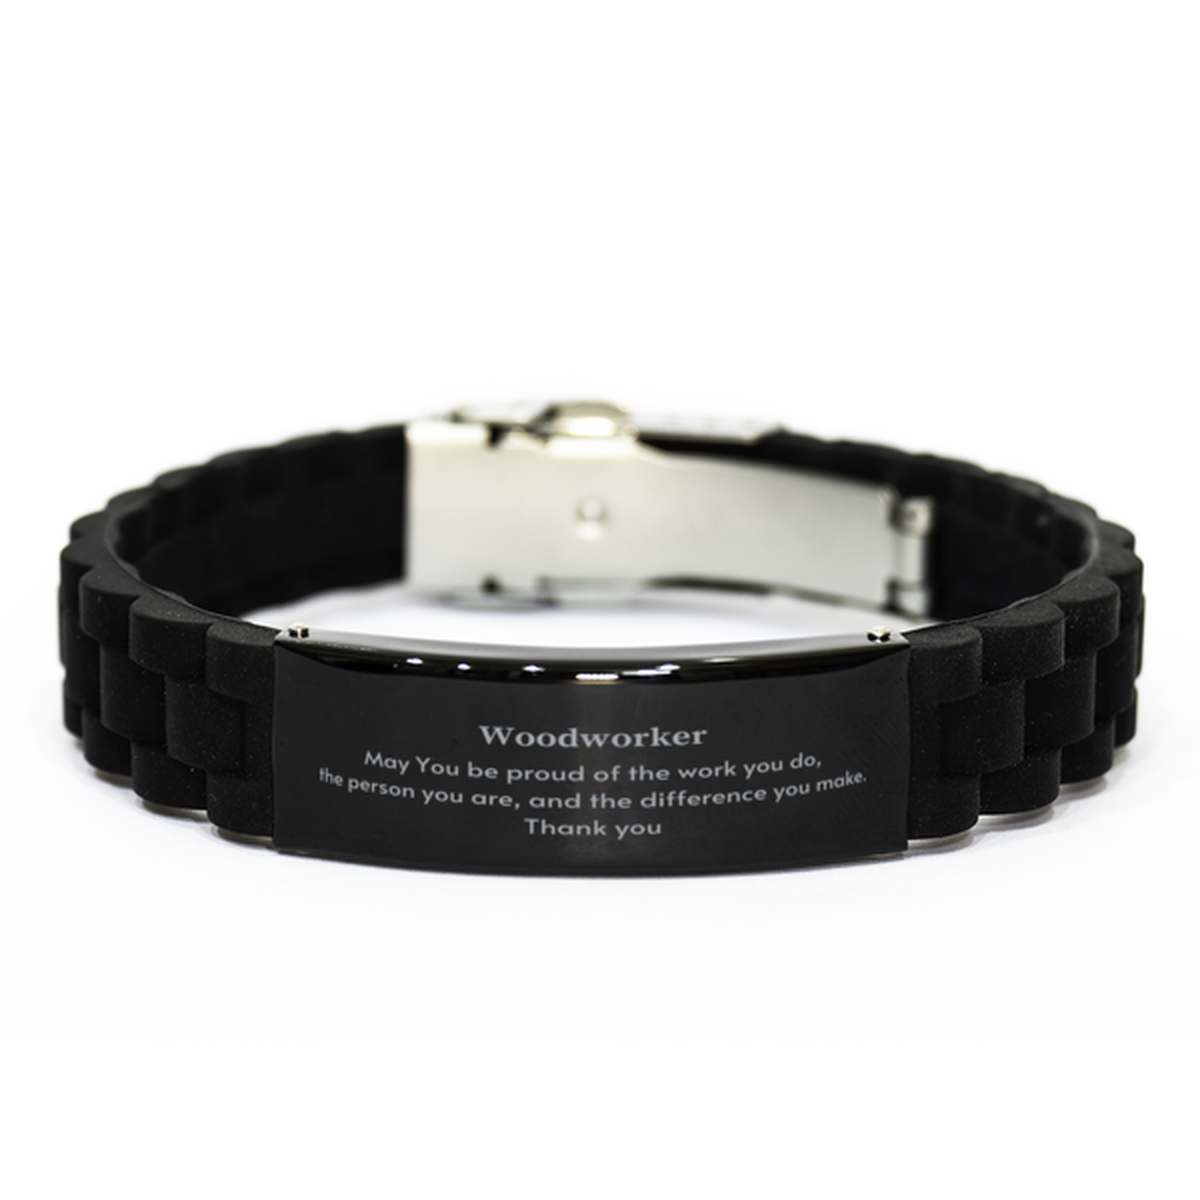 Heartwarming Black Glidelock Clasp Bracelet Retirement Coworkers Gifts for Woodworker, Woodworker May You be proud of the work you do, the person you are Gifts for Boss Men Women Friends